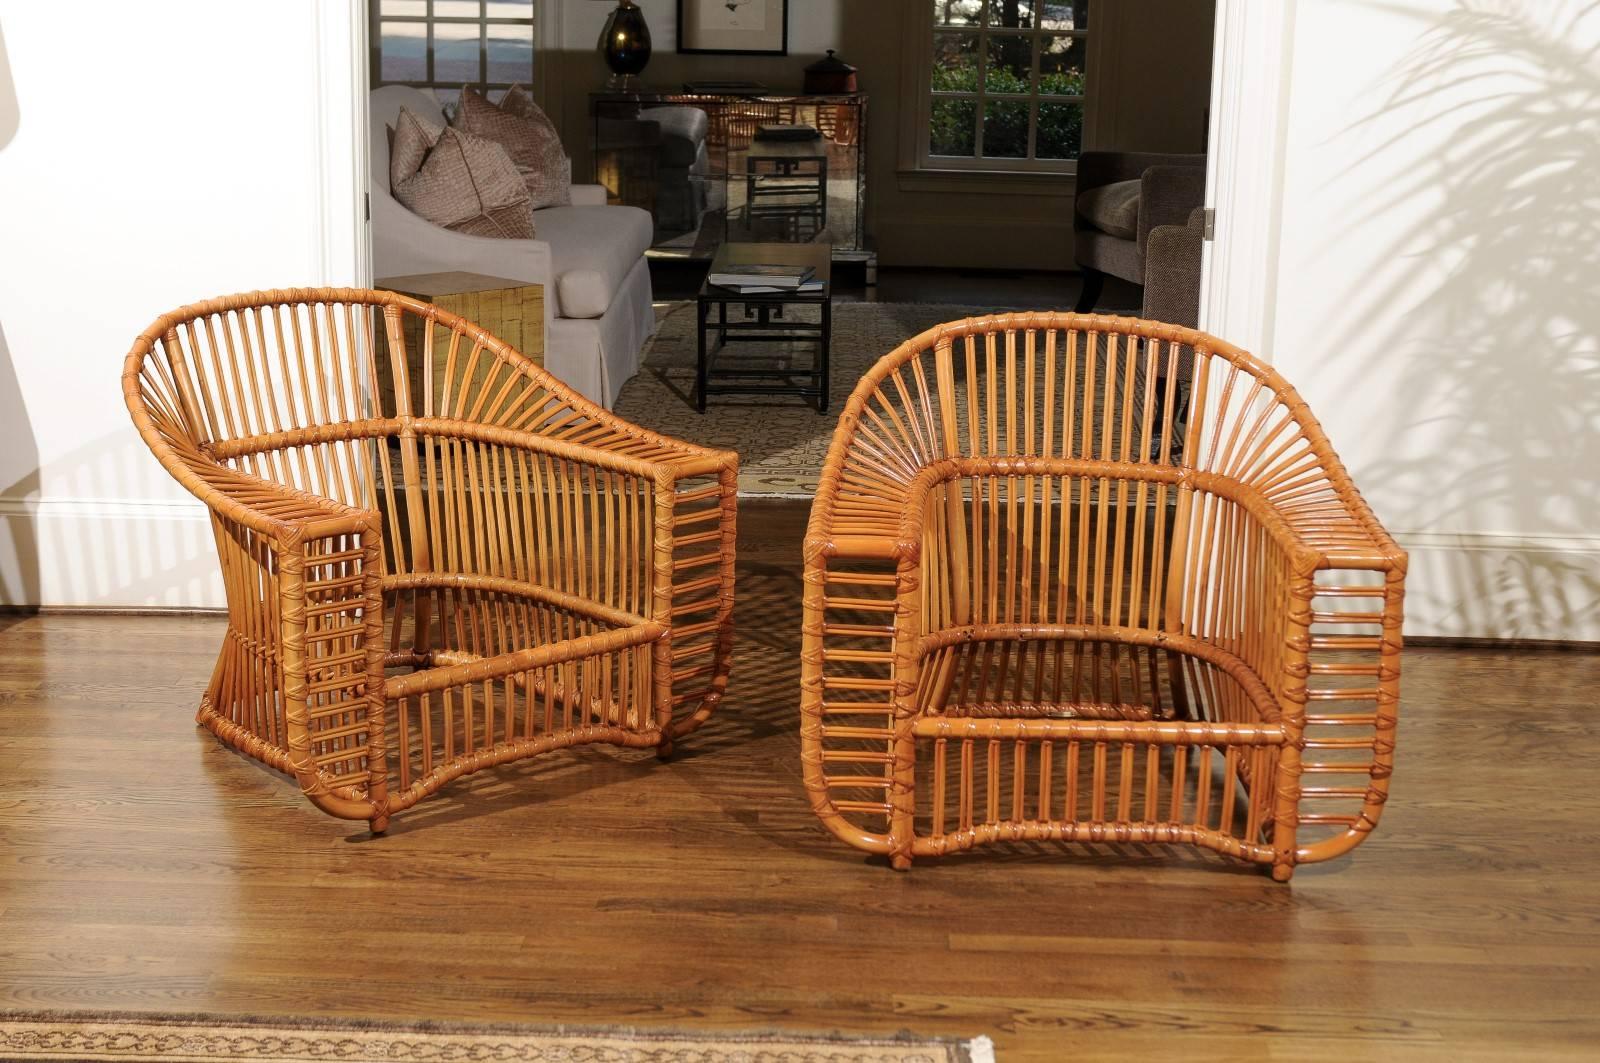 An exquisite and unique pair of lounge or club chairs by the esteemed Henry Olko for his Willow and Reed firm, circa 1979.  These rare chairs are from the Tiara series. Stout and sturdy rattan and hardwood construction with exacting detail. These